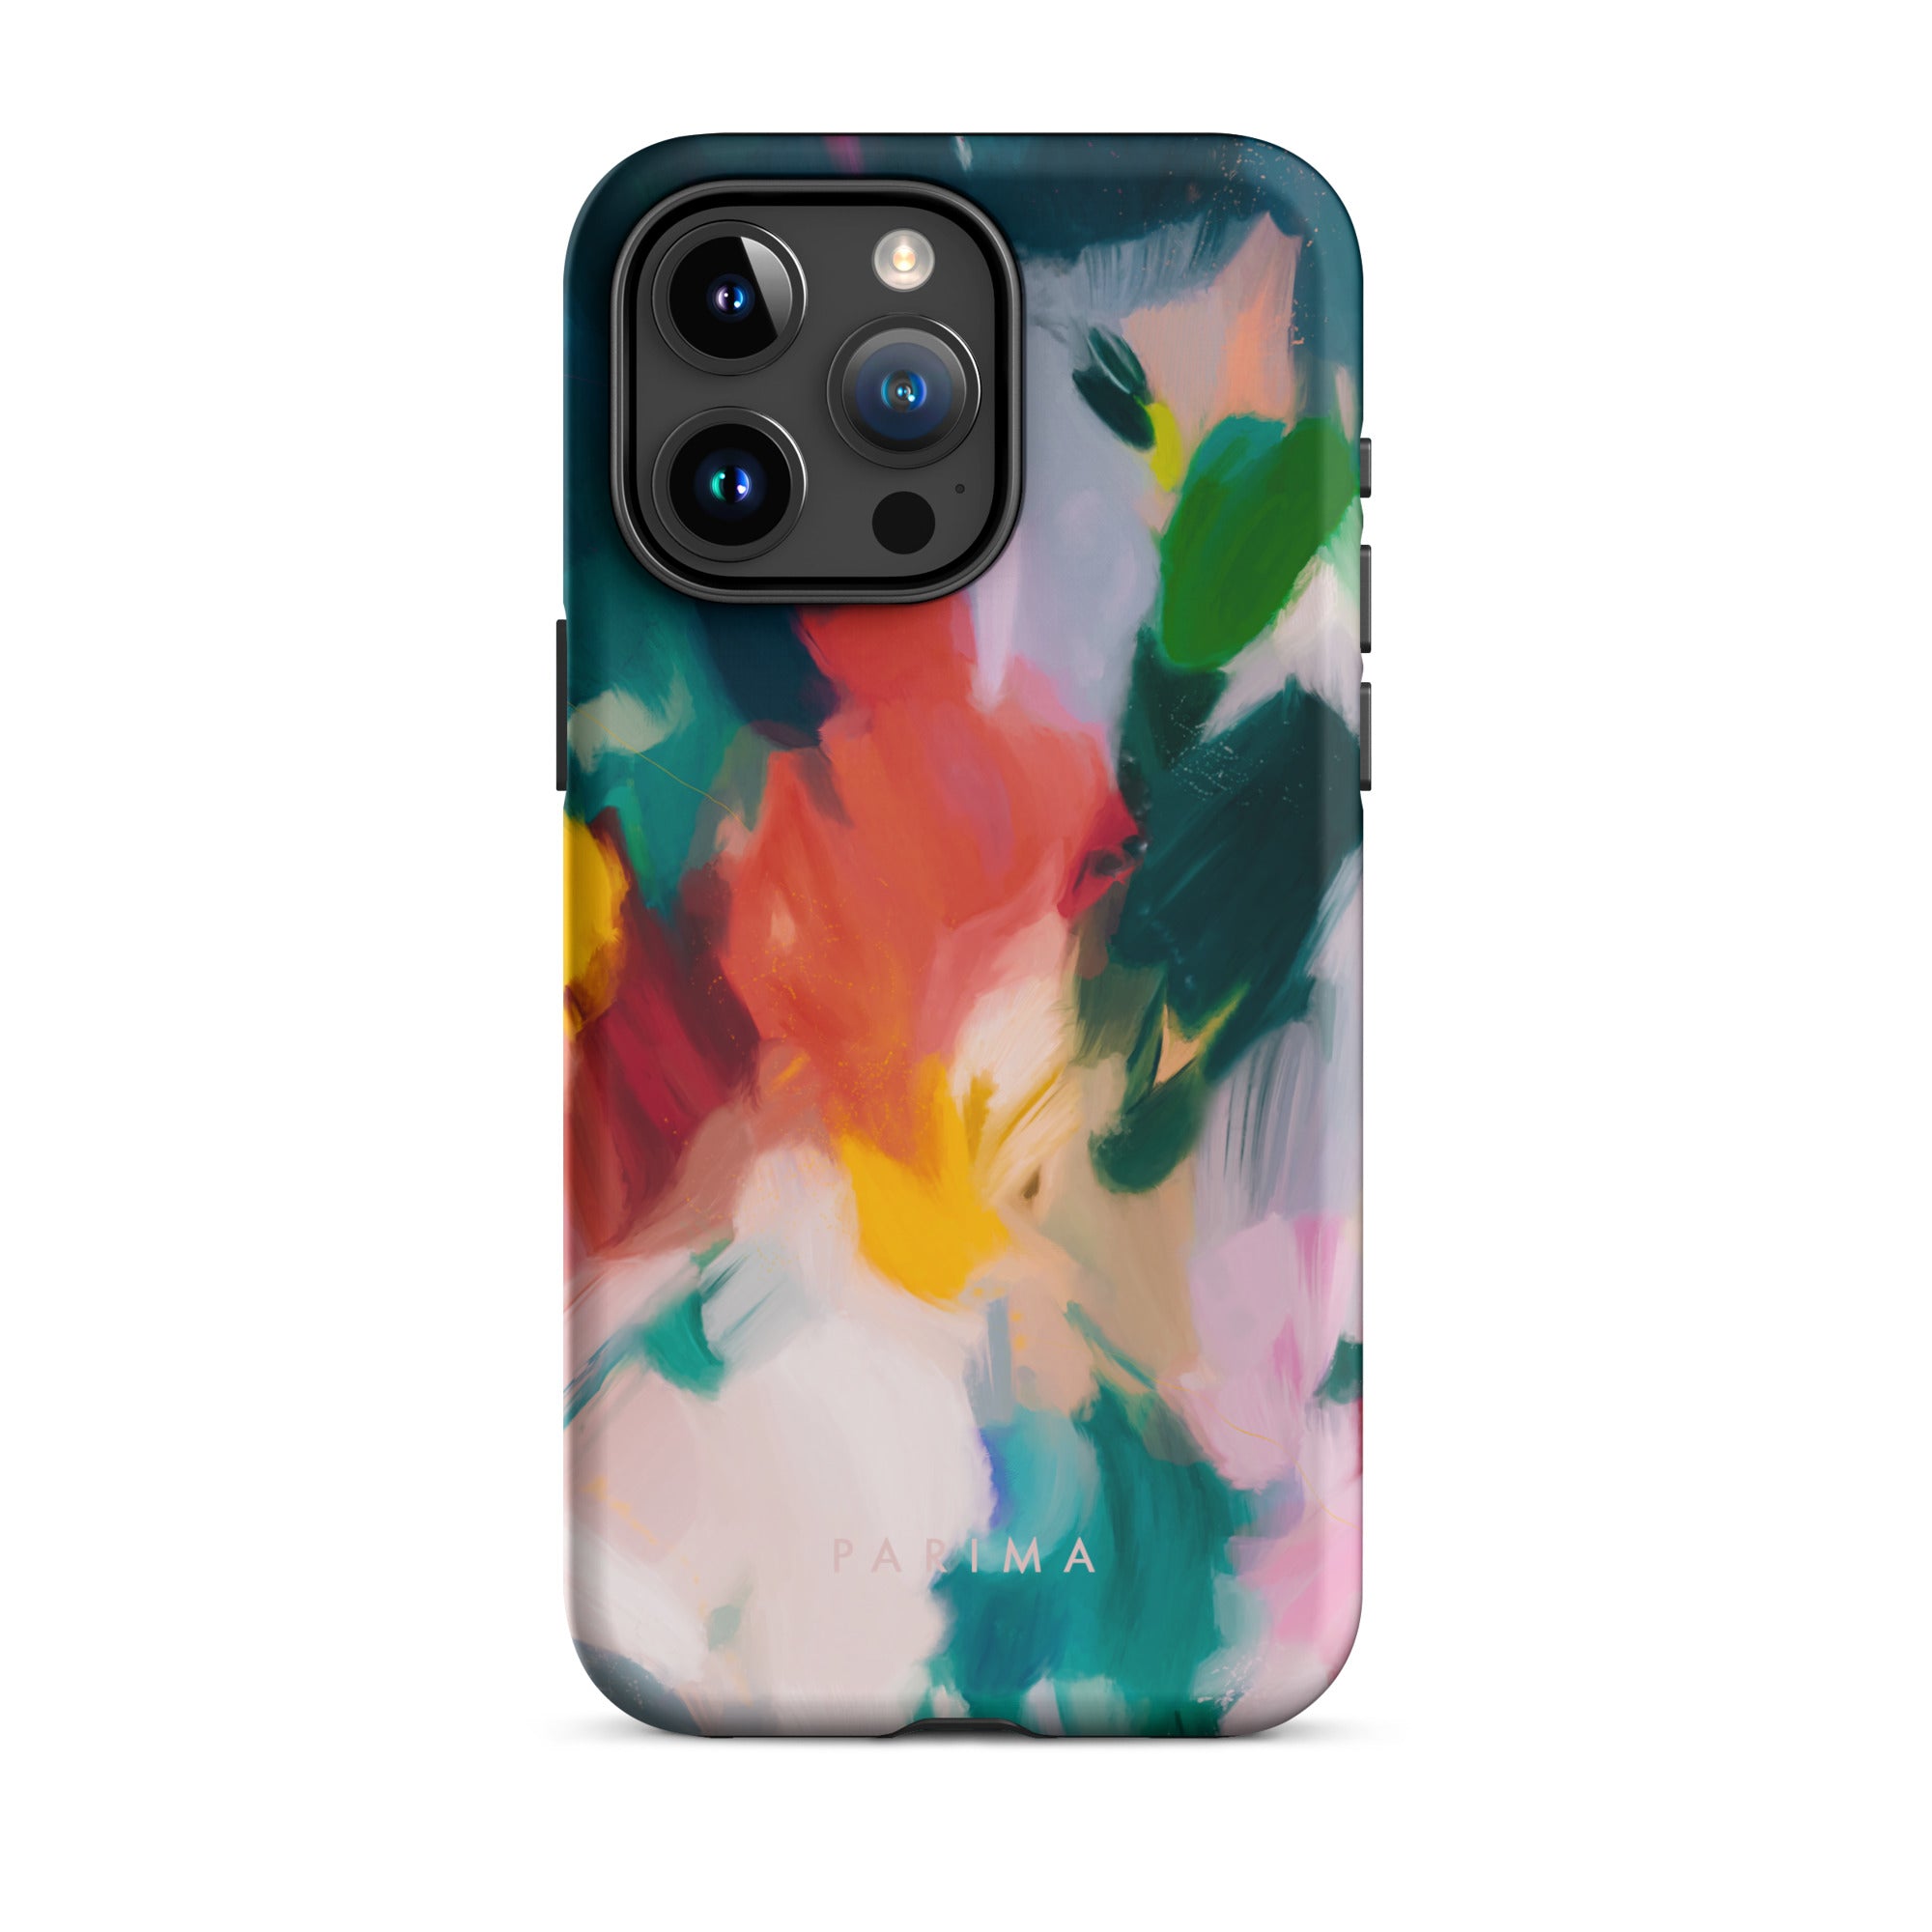 Pomme, blue and red abstract art on iPhone 15 Pro Max tough case by Parima Studio